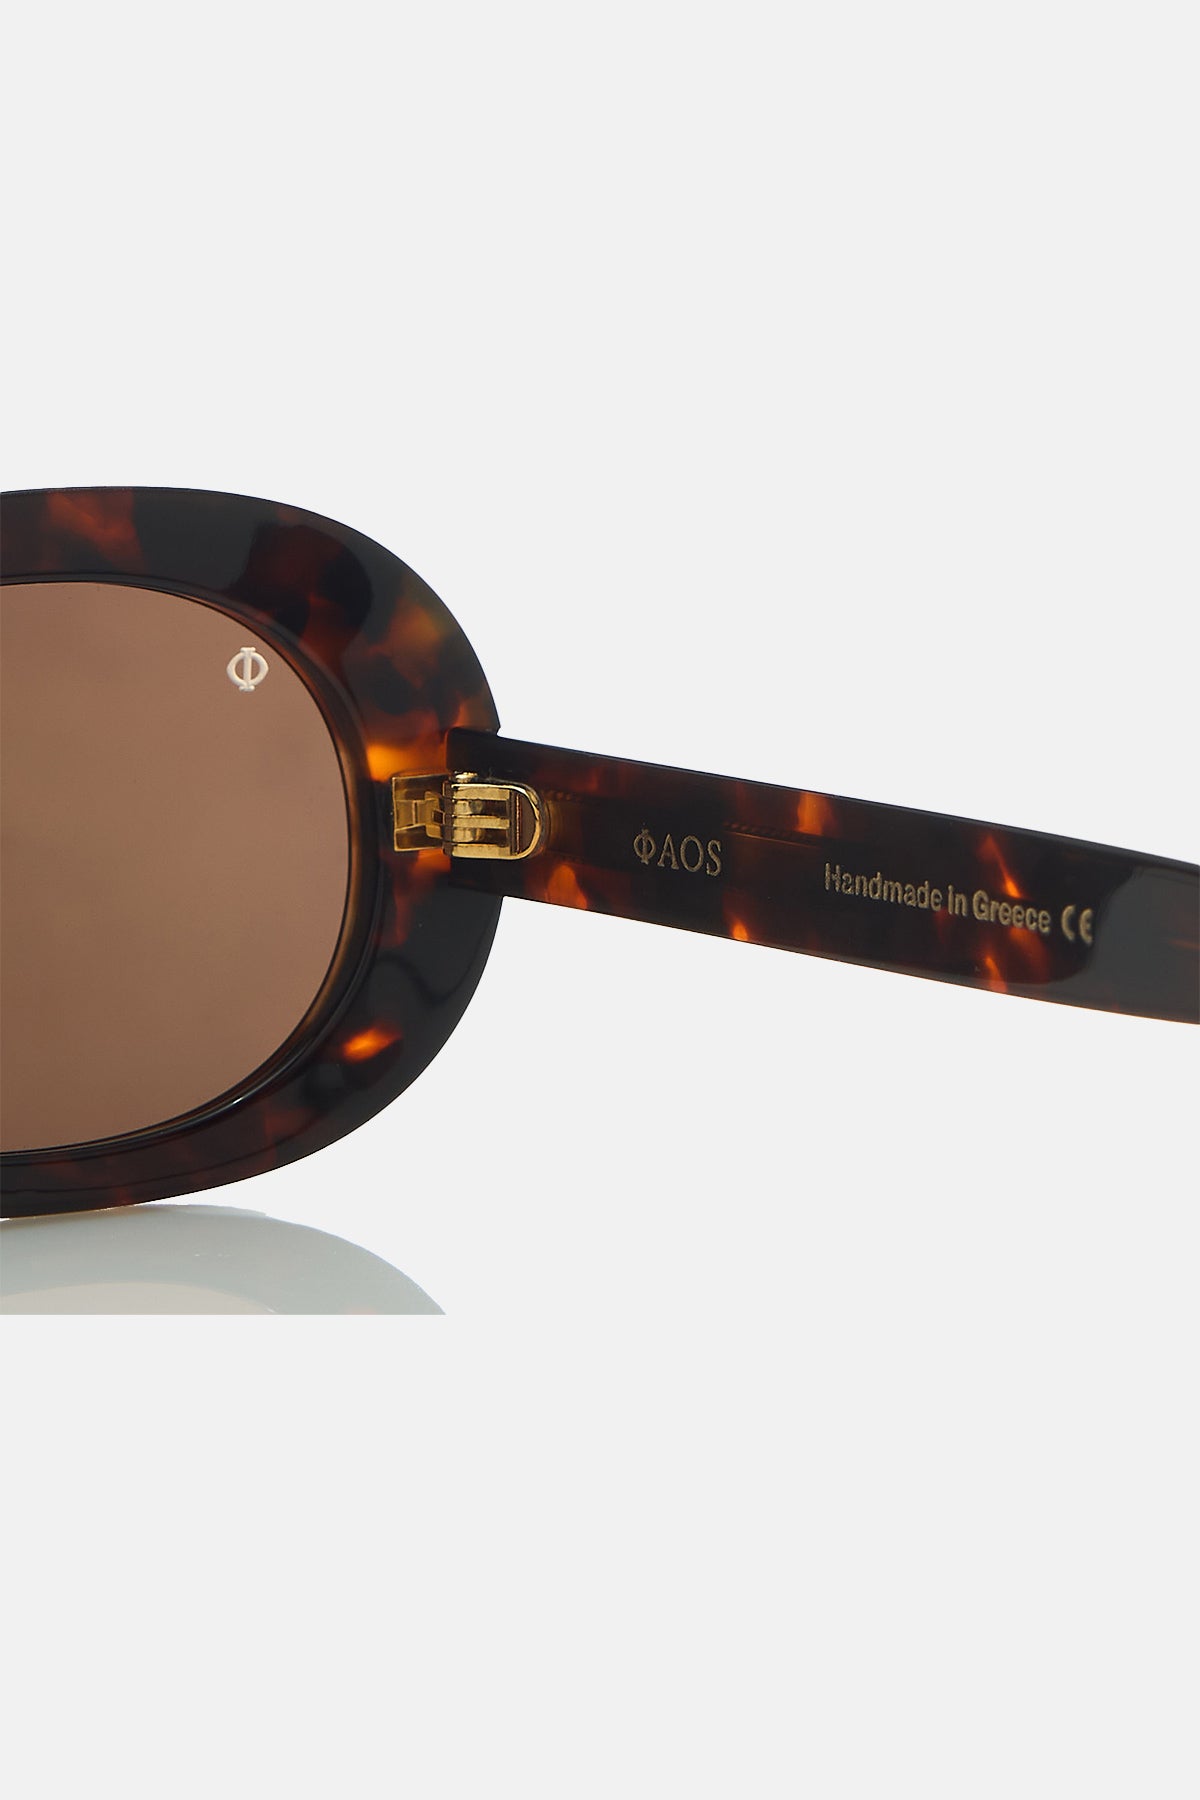 SUNGLASSES "ITHACA" MARBLE BROWN